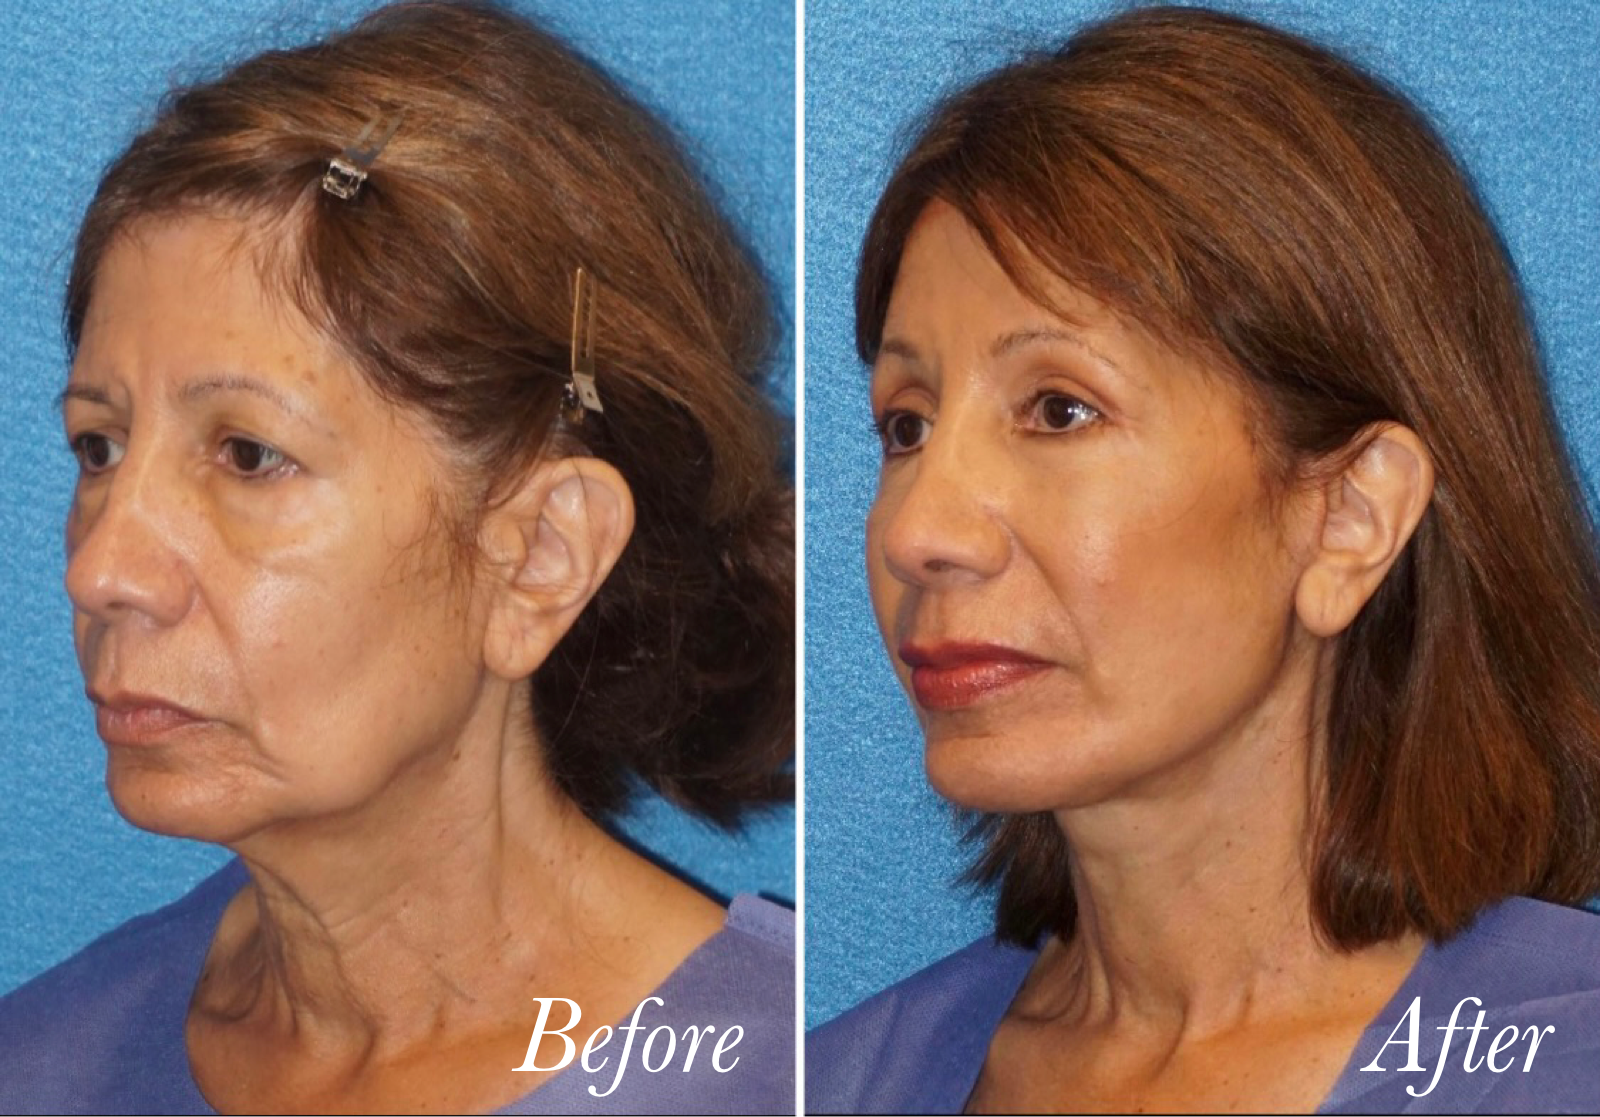 Plastic surgery before and after photo against a blue background.